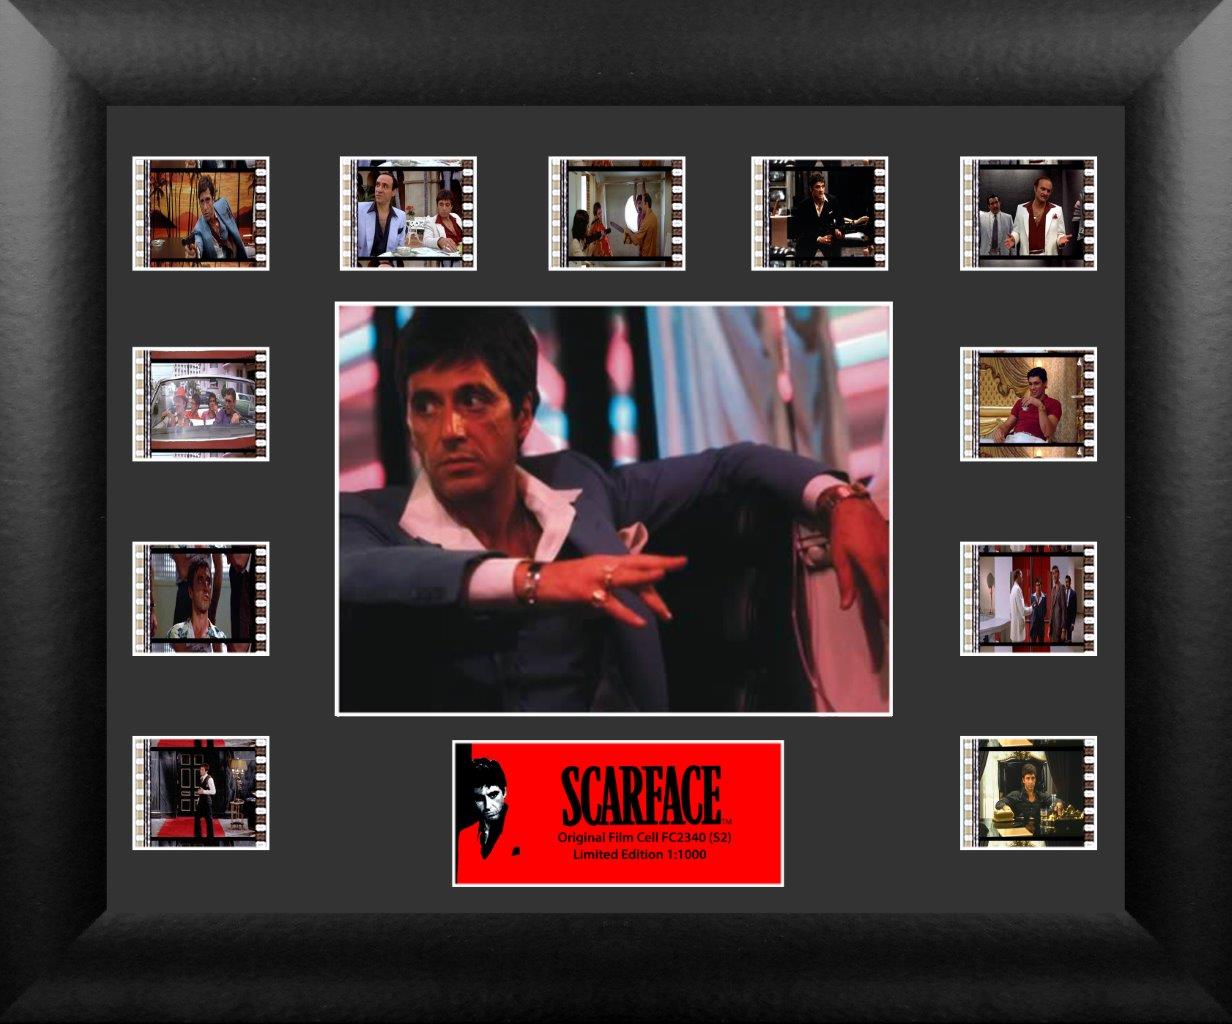 Scarface (S2) Limited Edition Mini Montage Framed FilmCells Presentation USFC2340